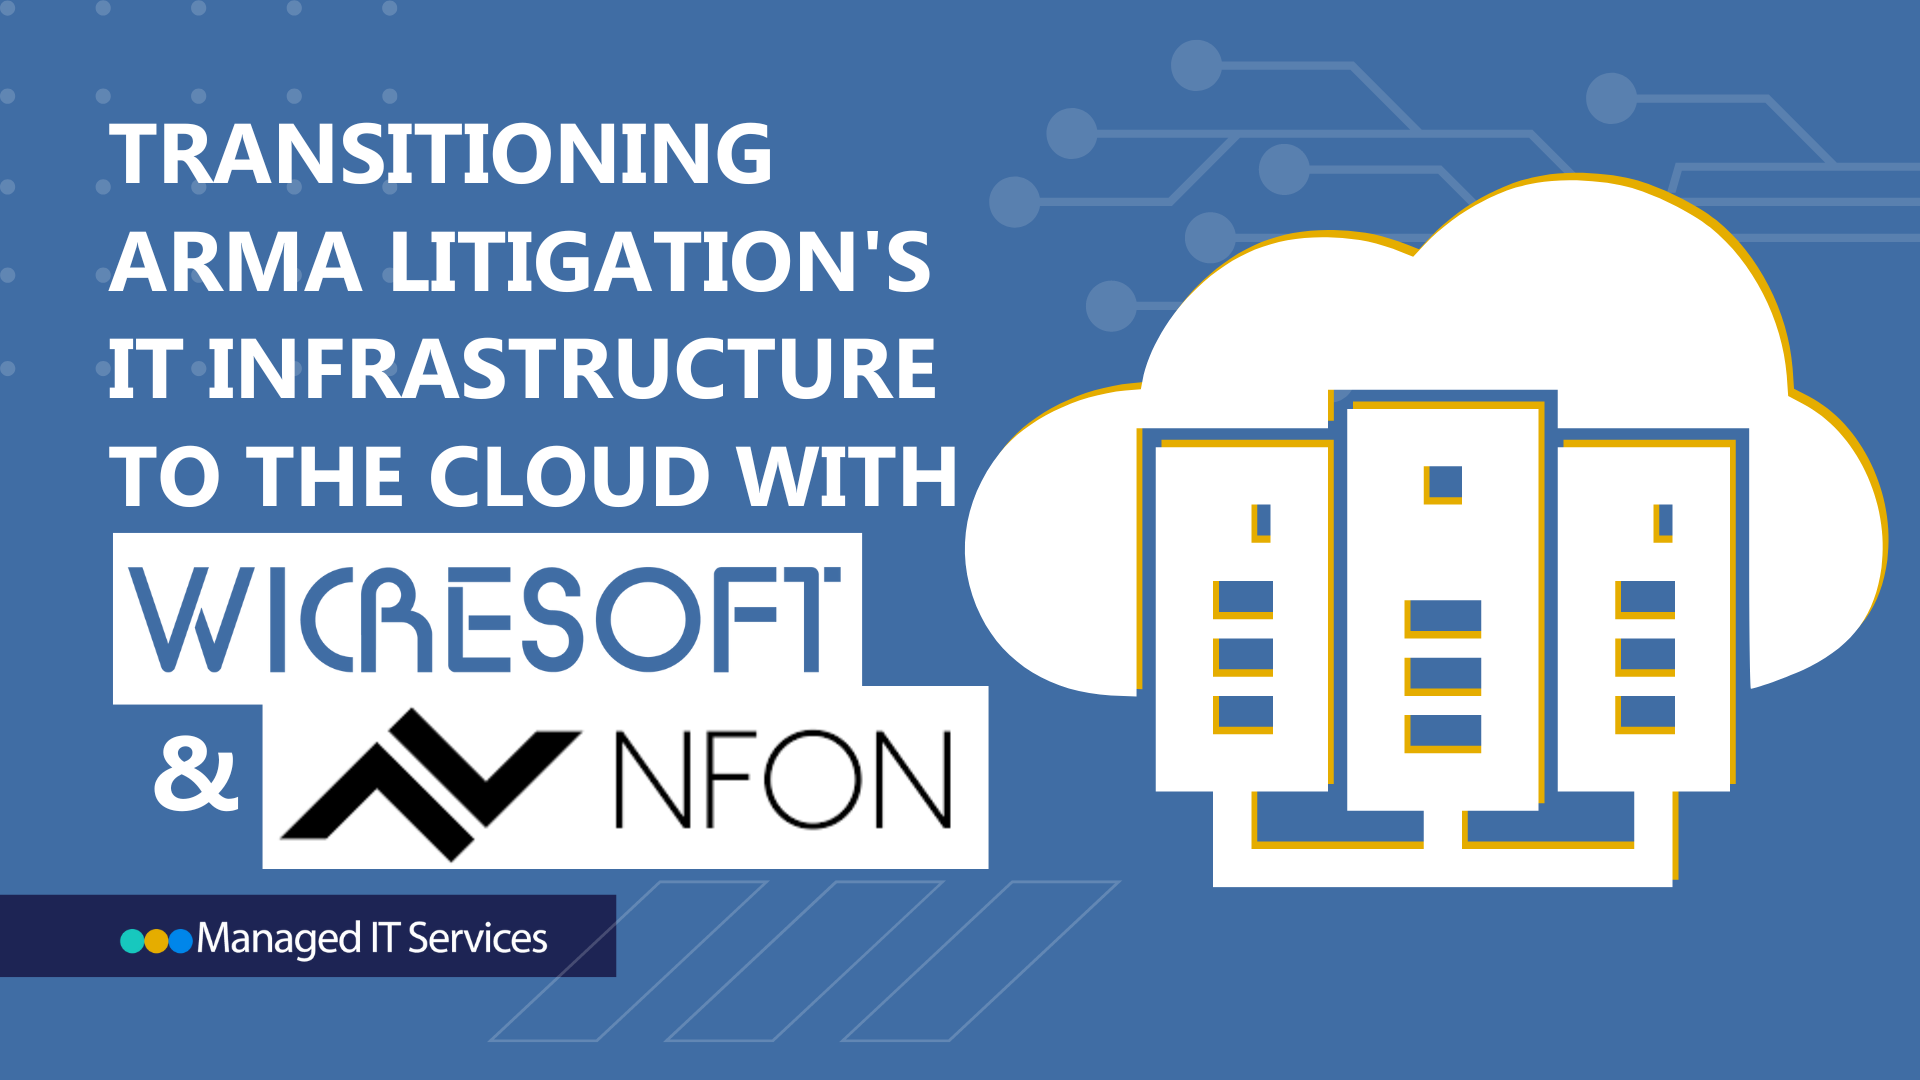 Transitioning ARMA Litigation's IT Infrastructure to the Cloud with Wicresoft & NFON